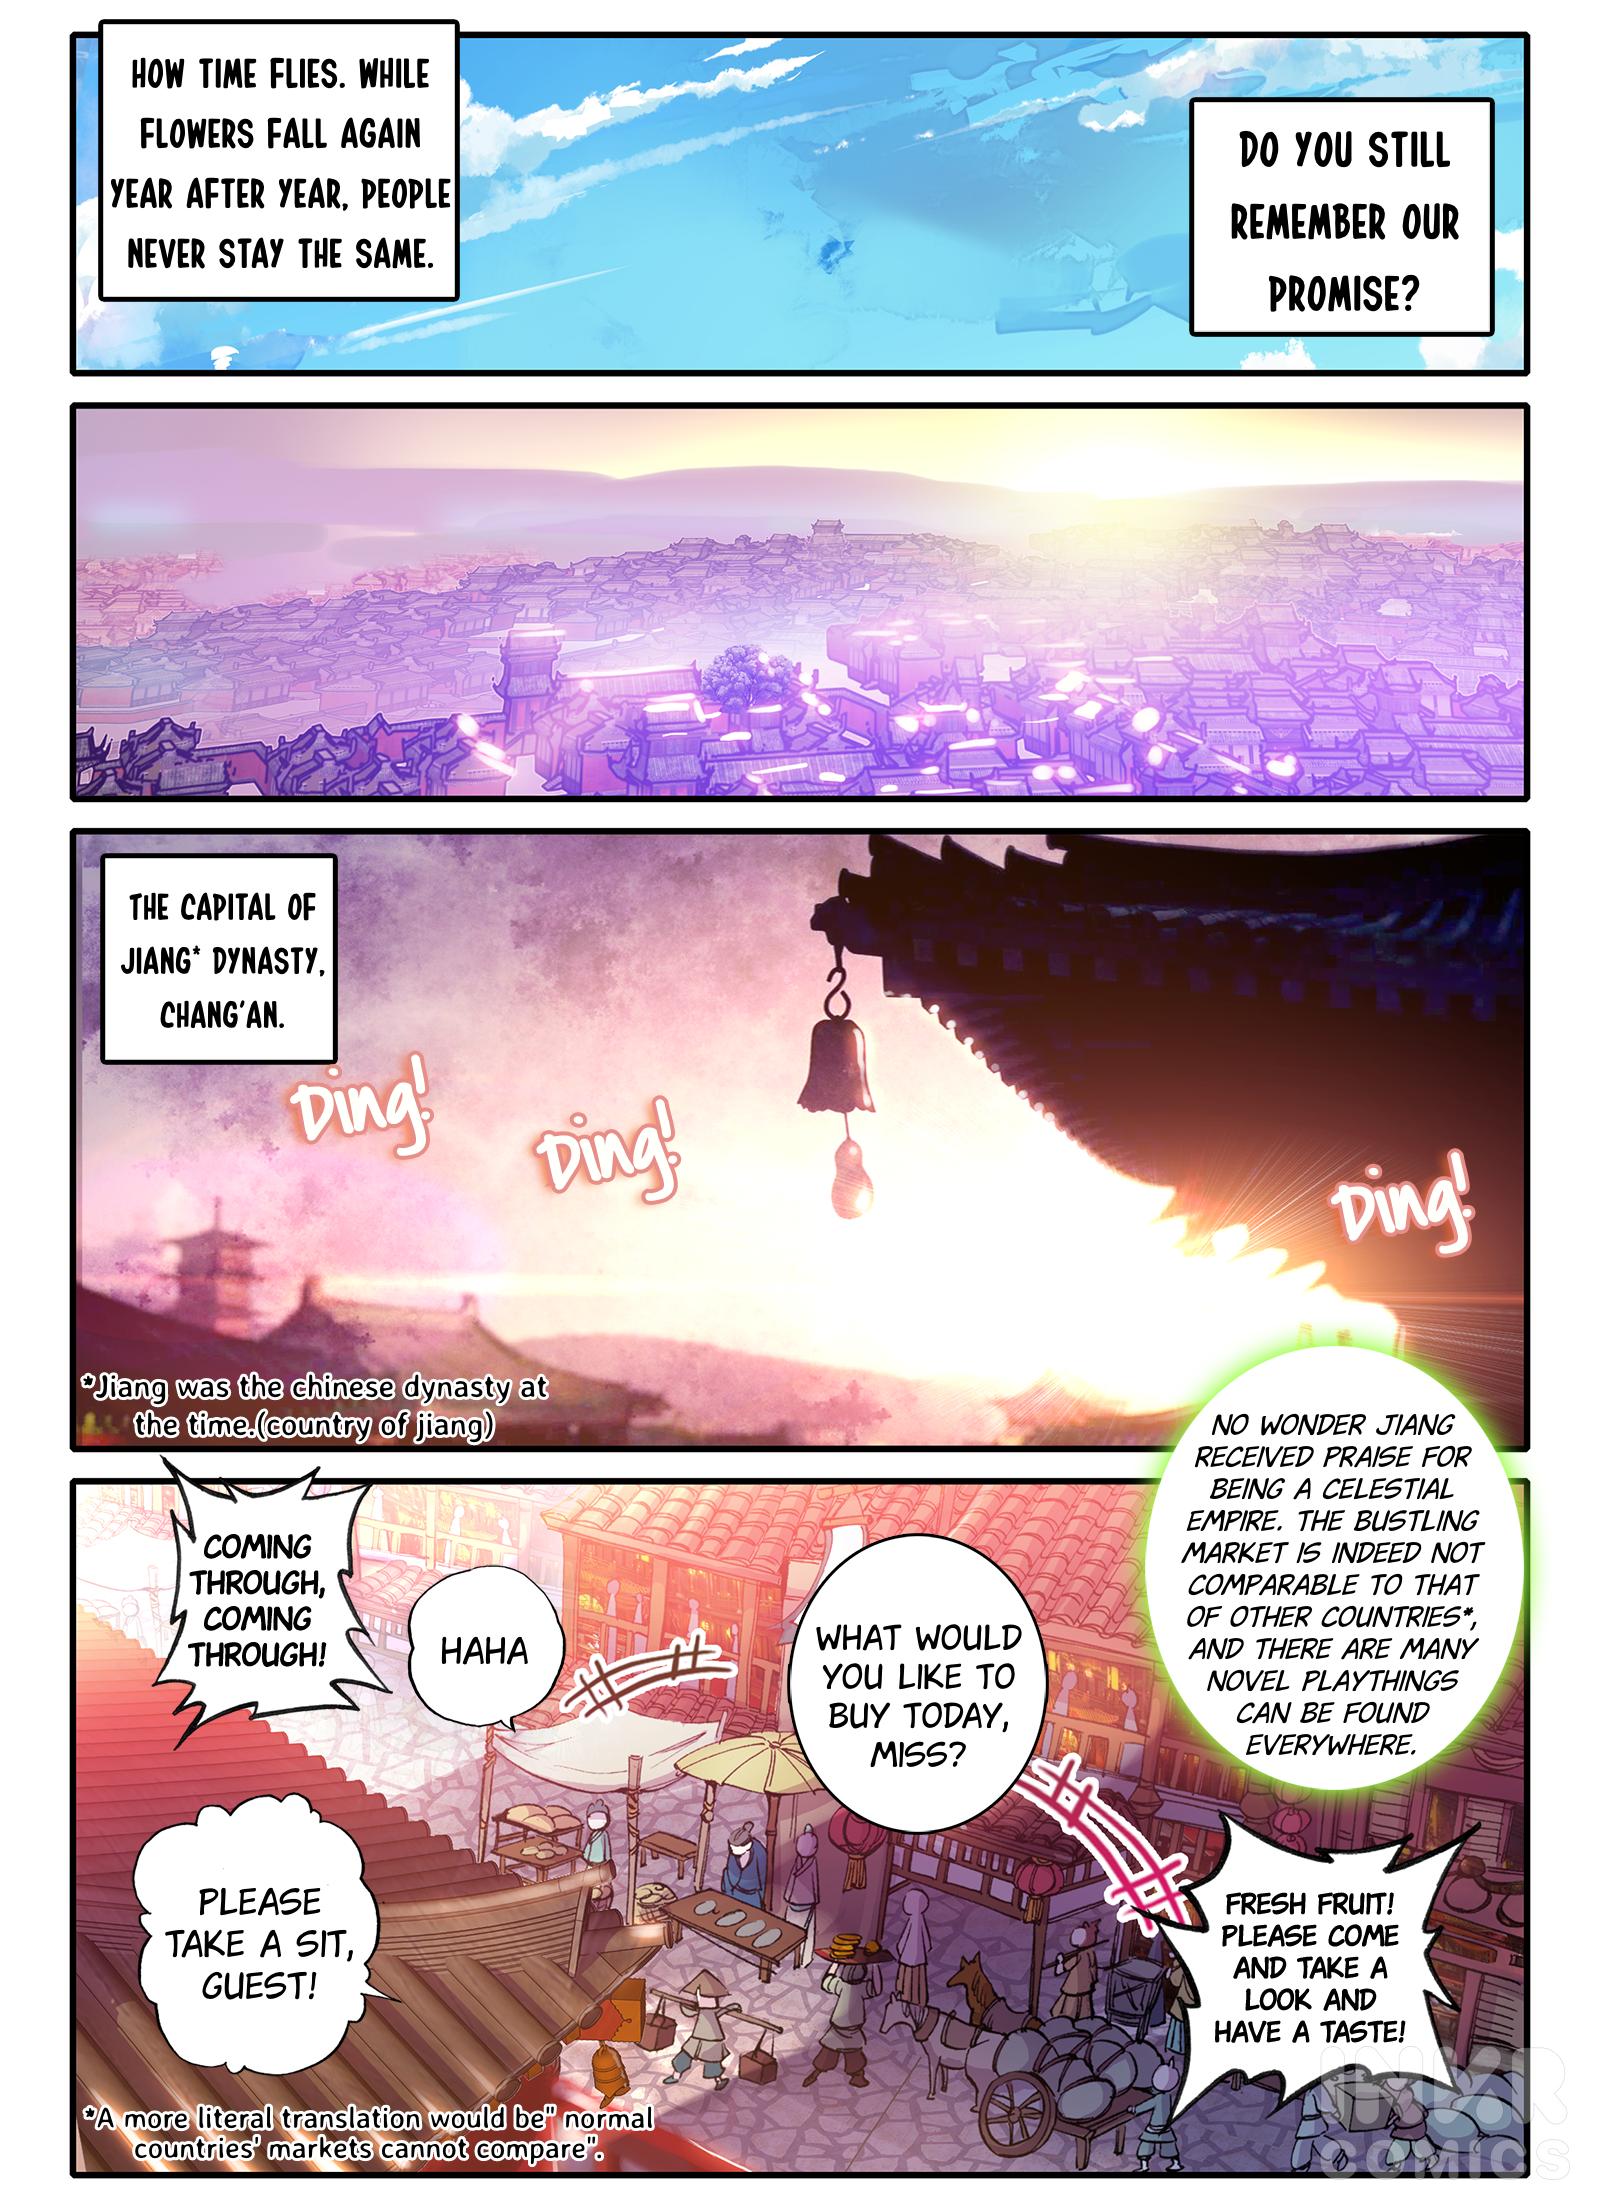 Song In Cloud - Page 2